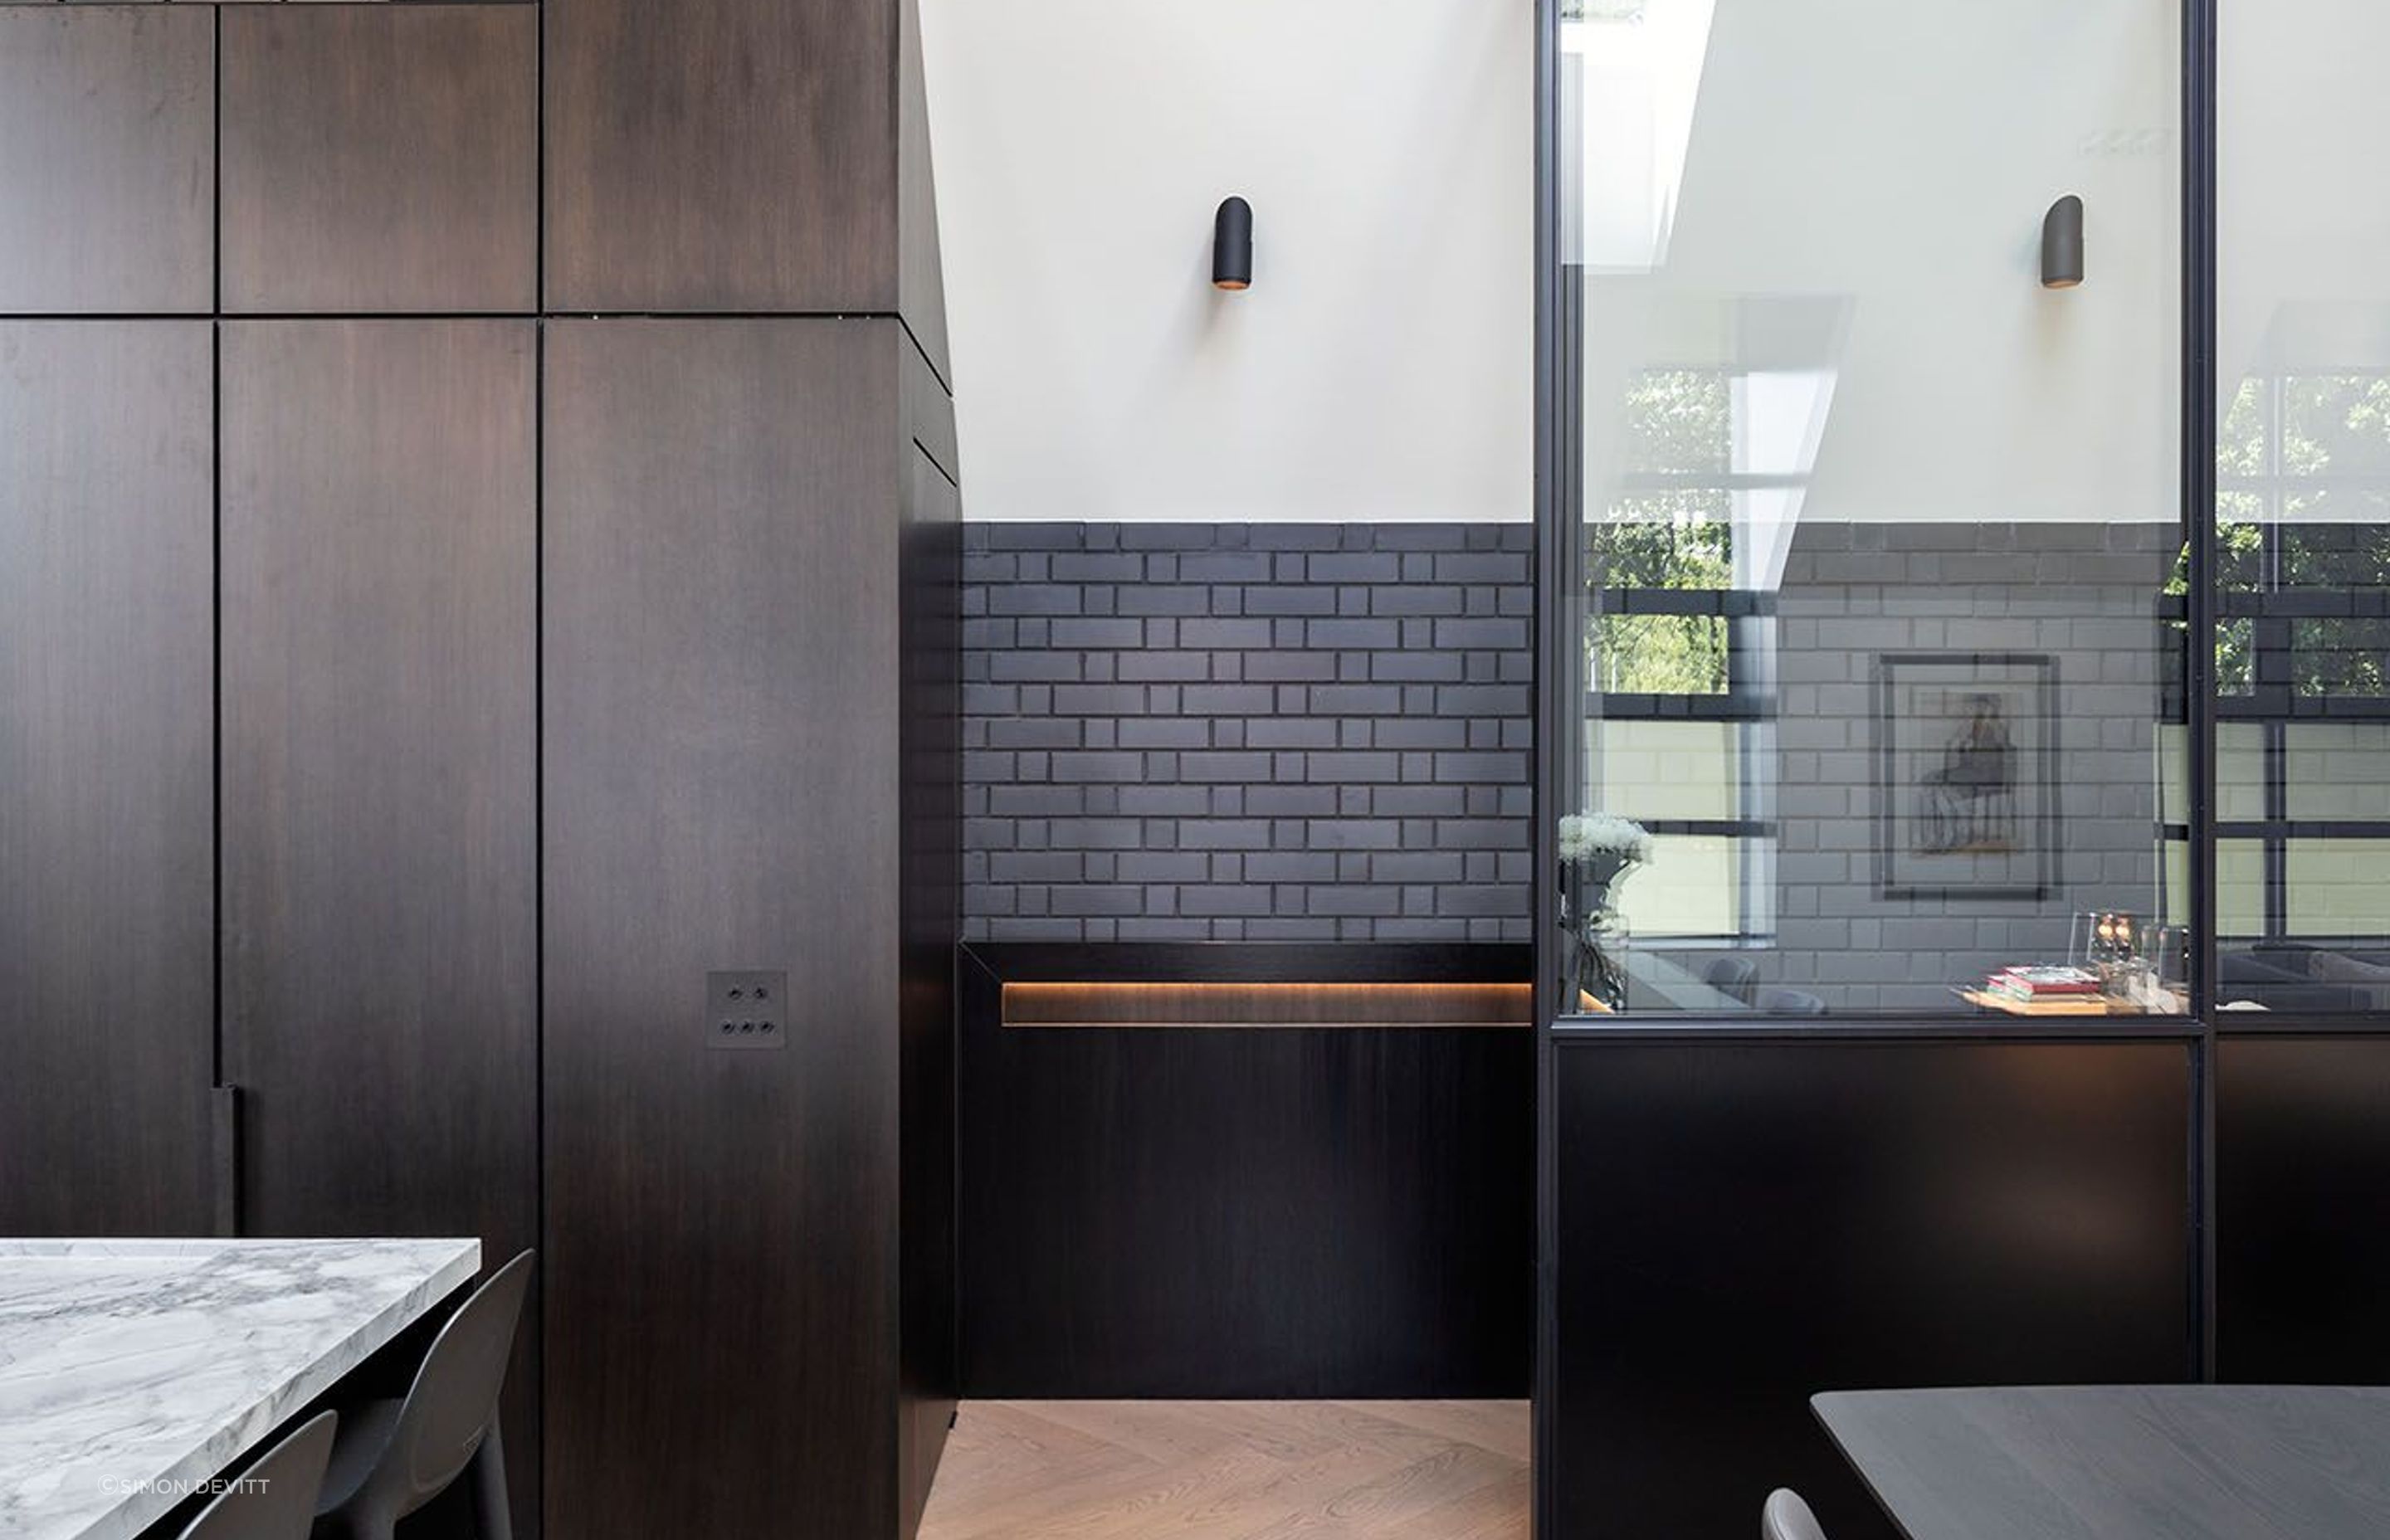 Black brick and steel are a key feature throughout the home, with the kitchen made up of two simple islands.